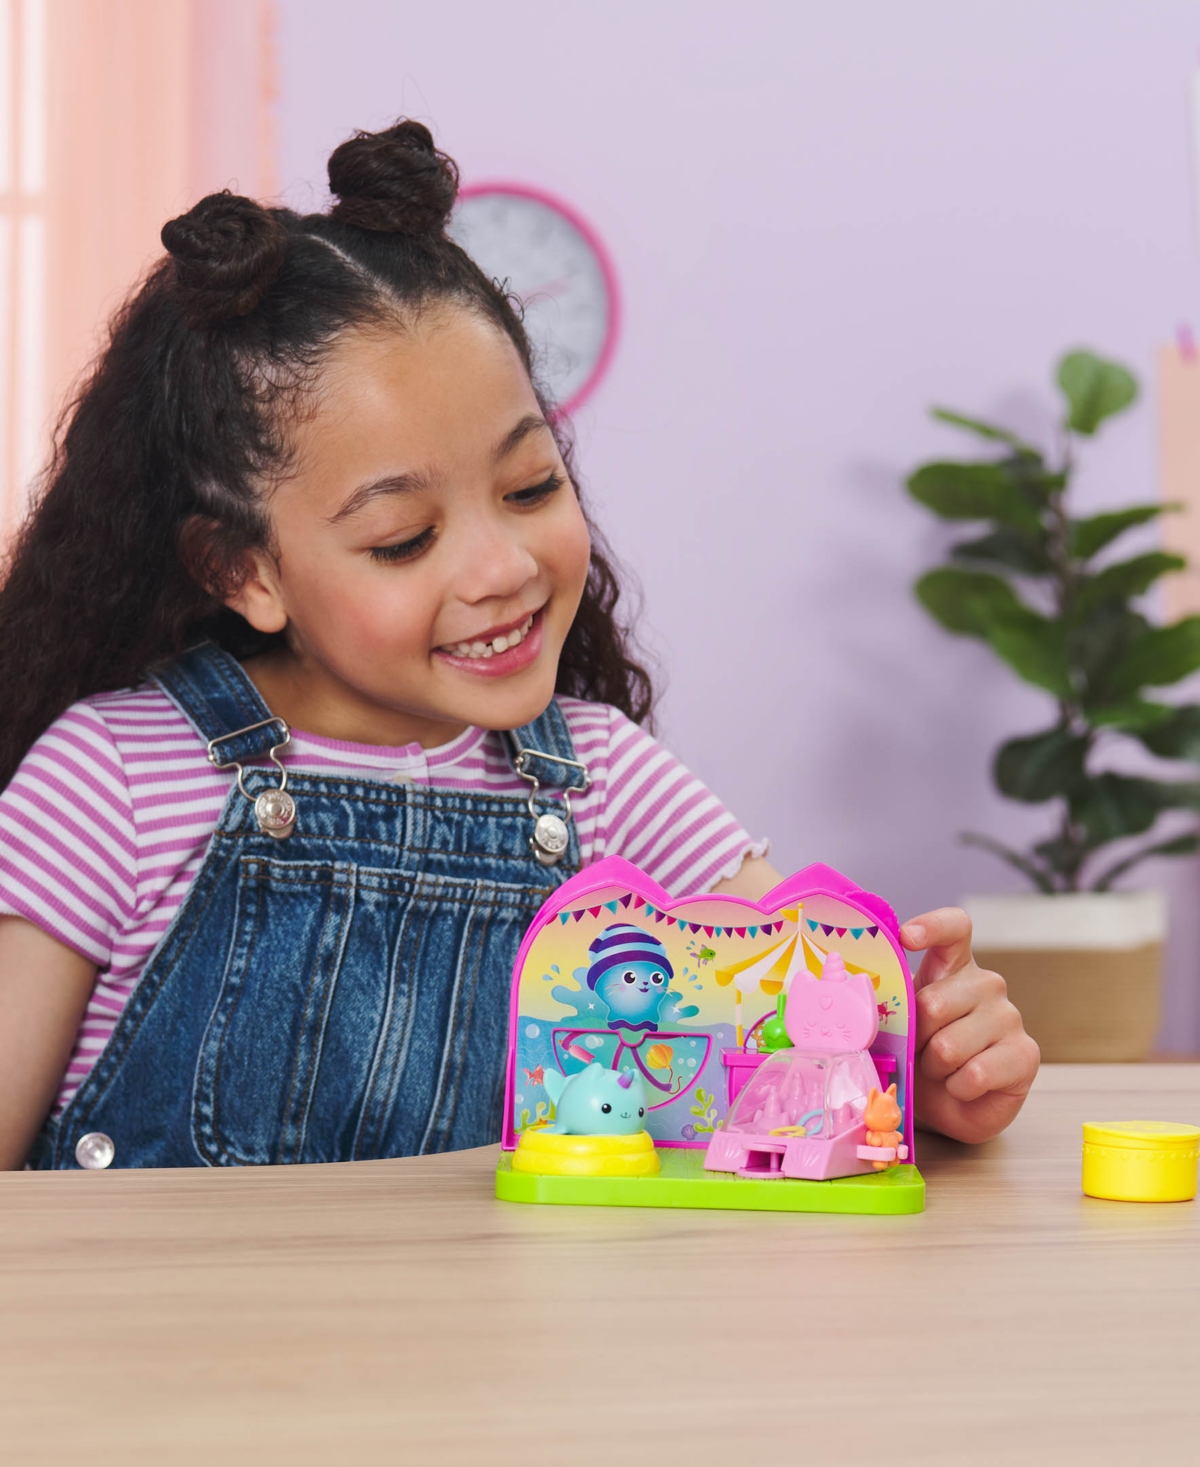 Shop Gabby's Dollhouse Dreamworks Kitty Narwhal's Carnival Room, With Toy Figure, Surprise Toys And Dollhouse Furniture In Multi-color